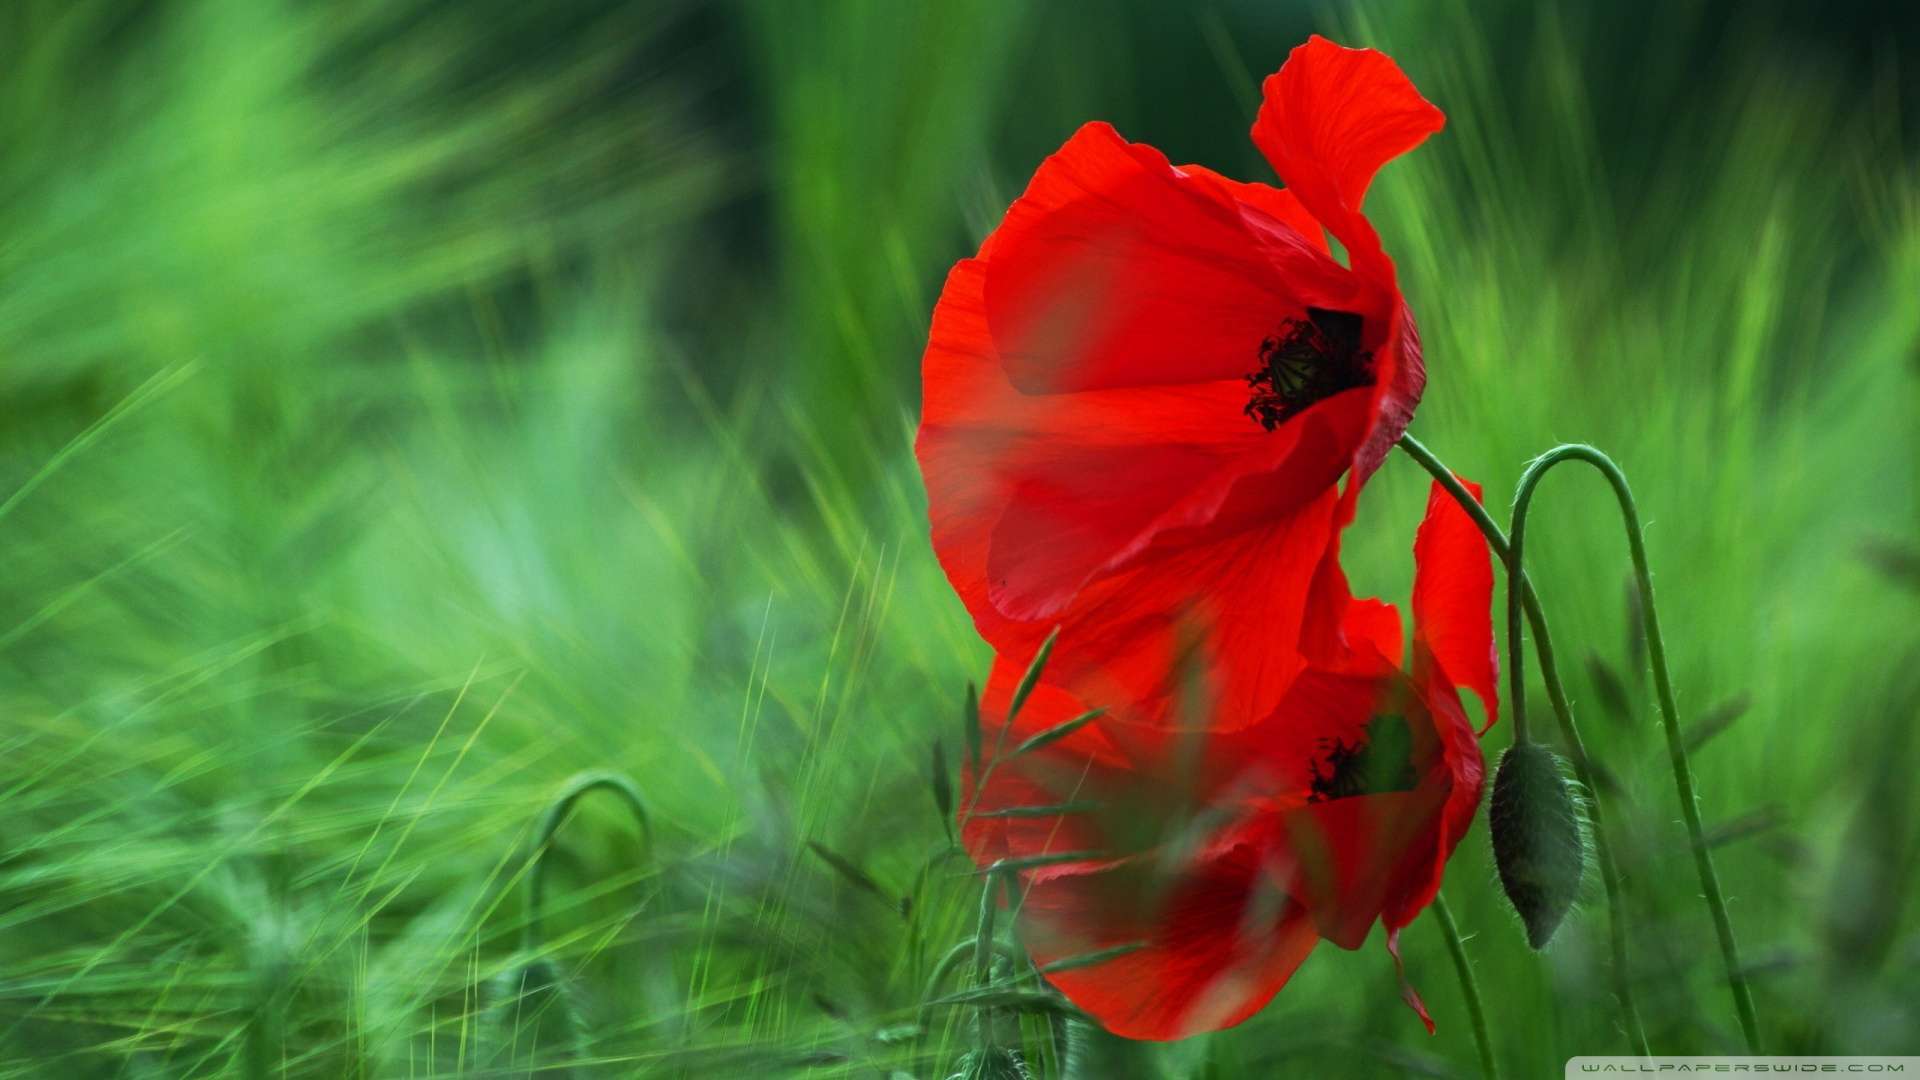 Wallpaper Red Poppy 1080p HD Upload At February